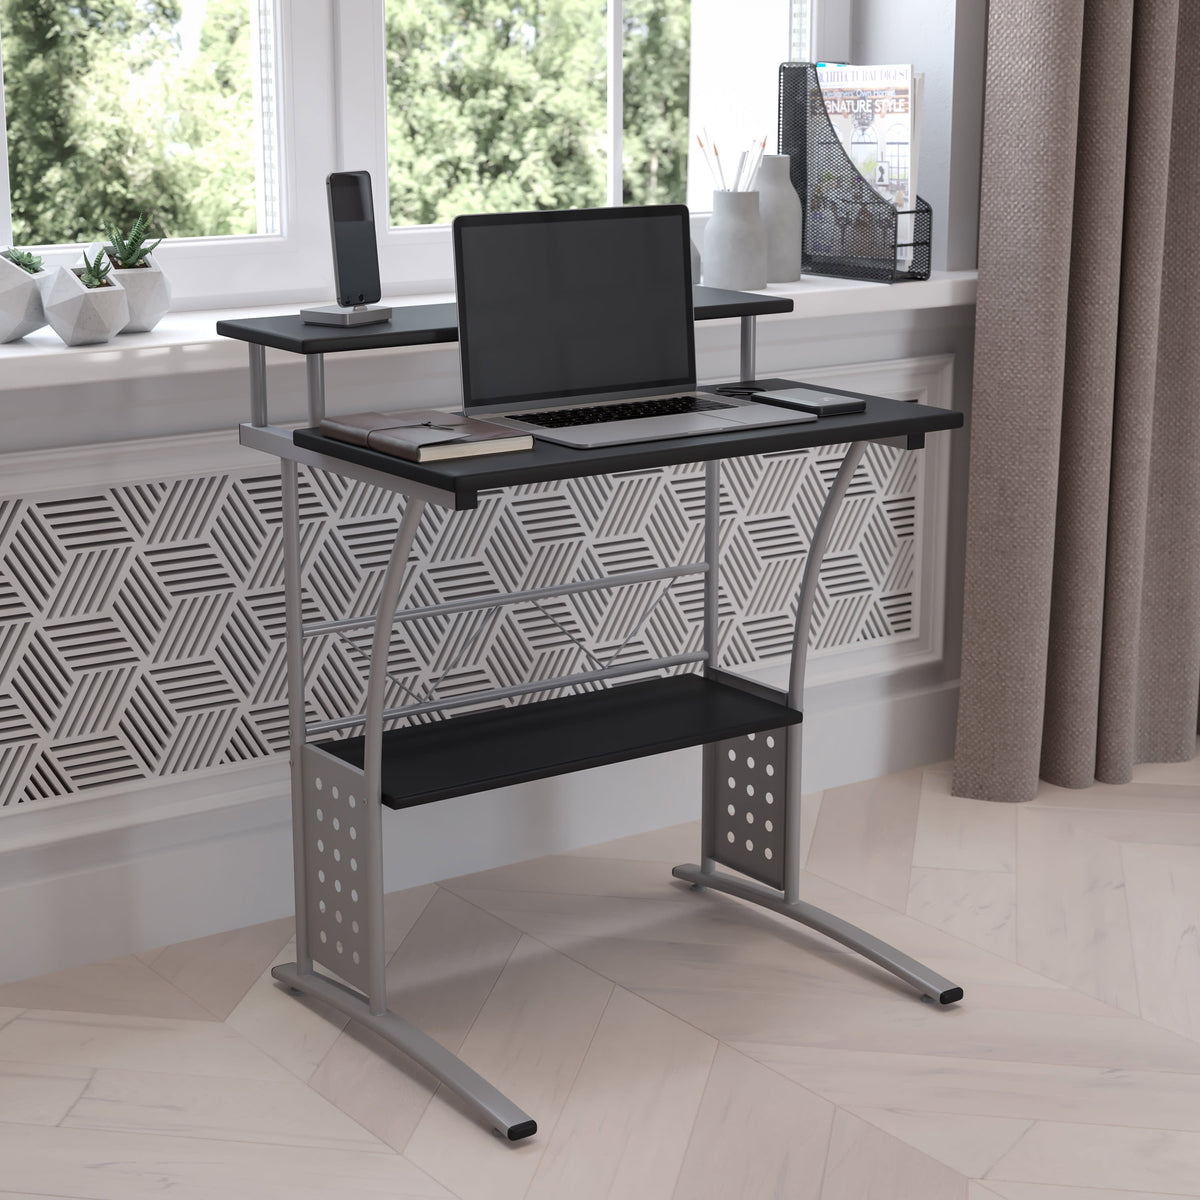 Black |#| Black Computer Desk with Perforated Side Paneling and Raised Monitor Shelf